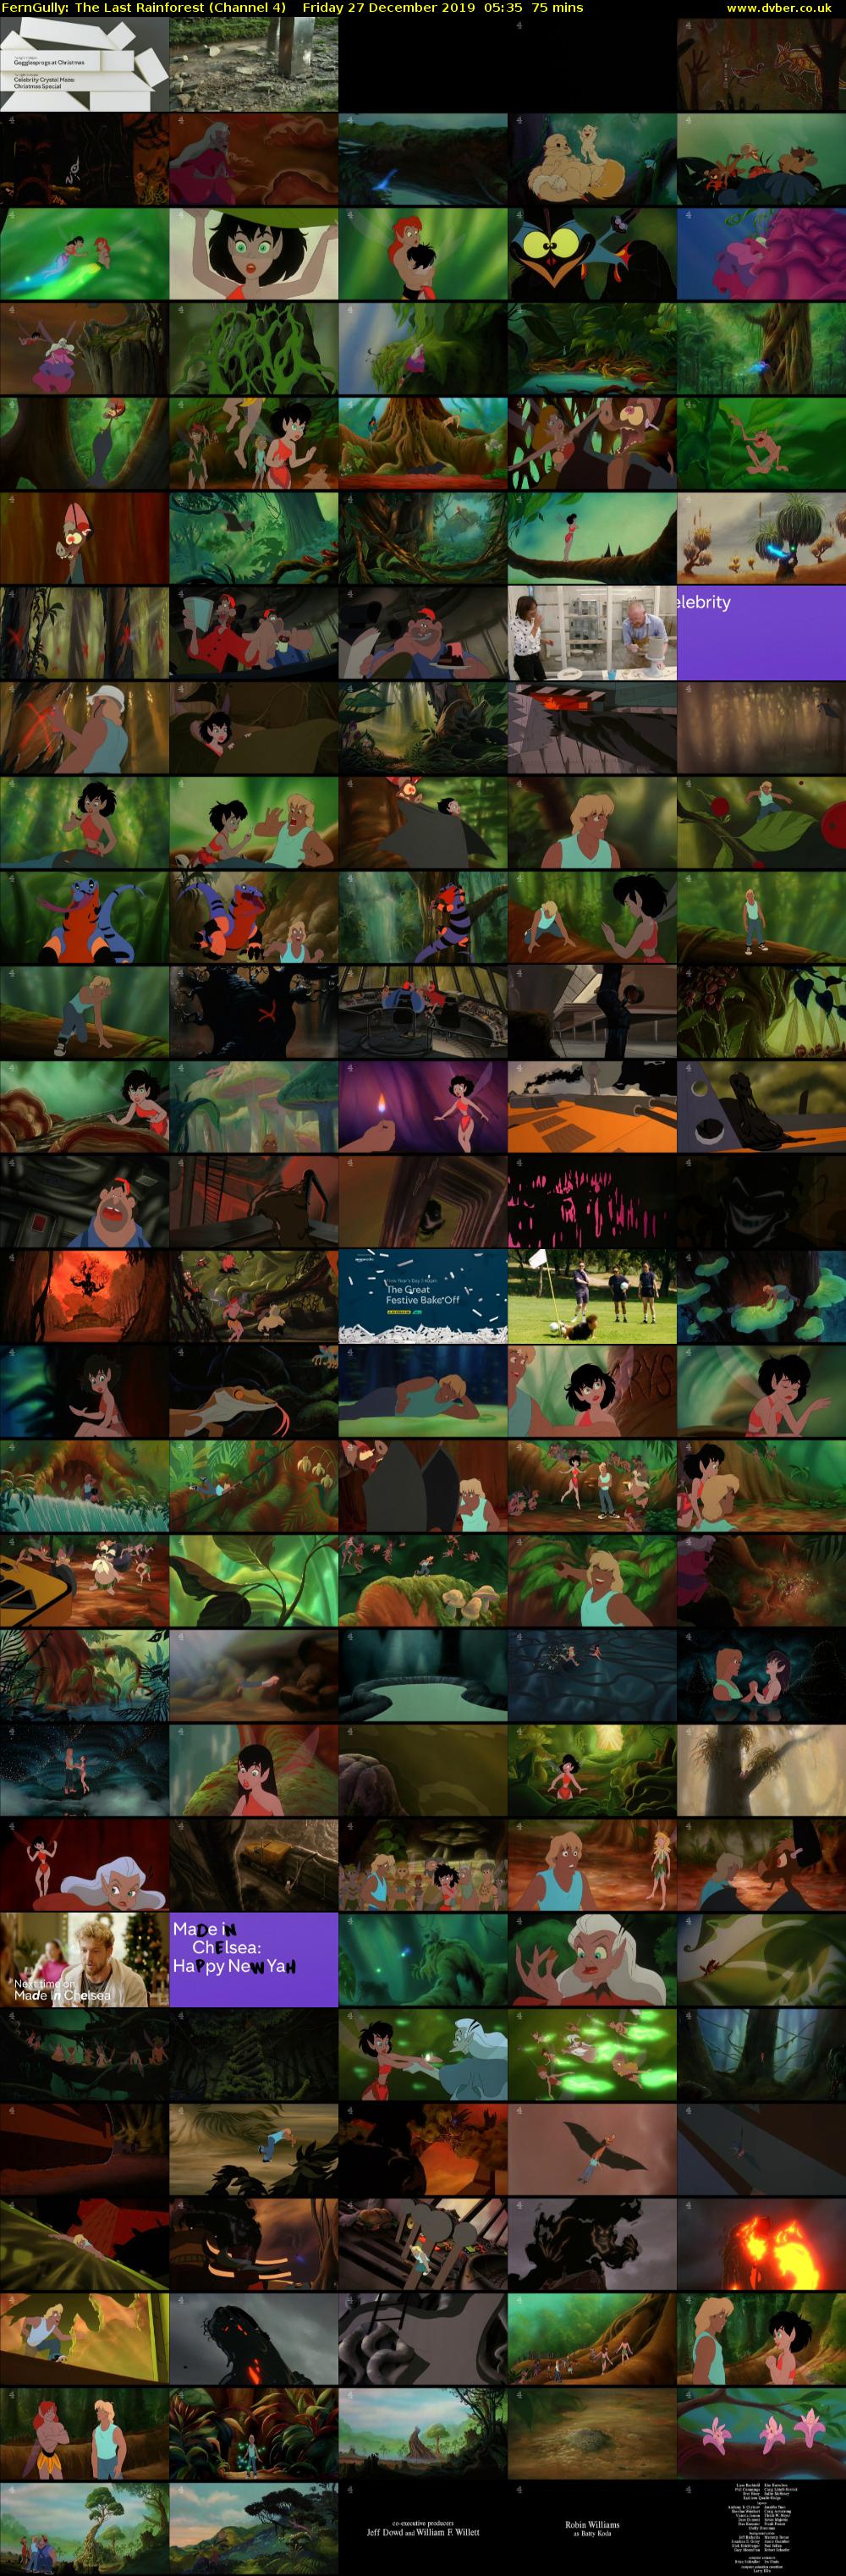 FernGully: The Last Rainforest (Channel 4) Friday 27 December 2019 05:35 - 06:50